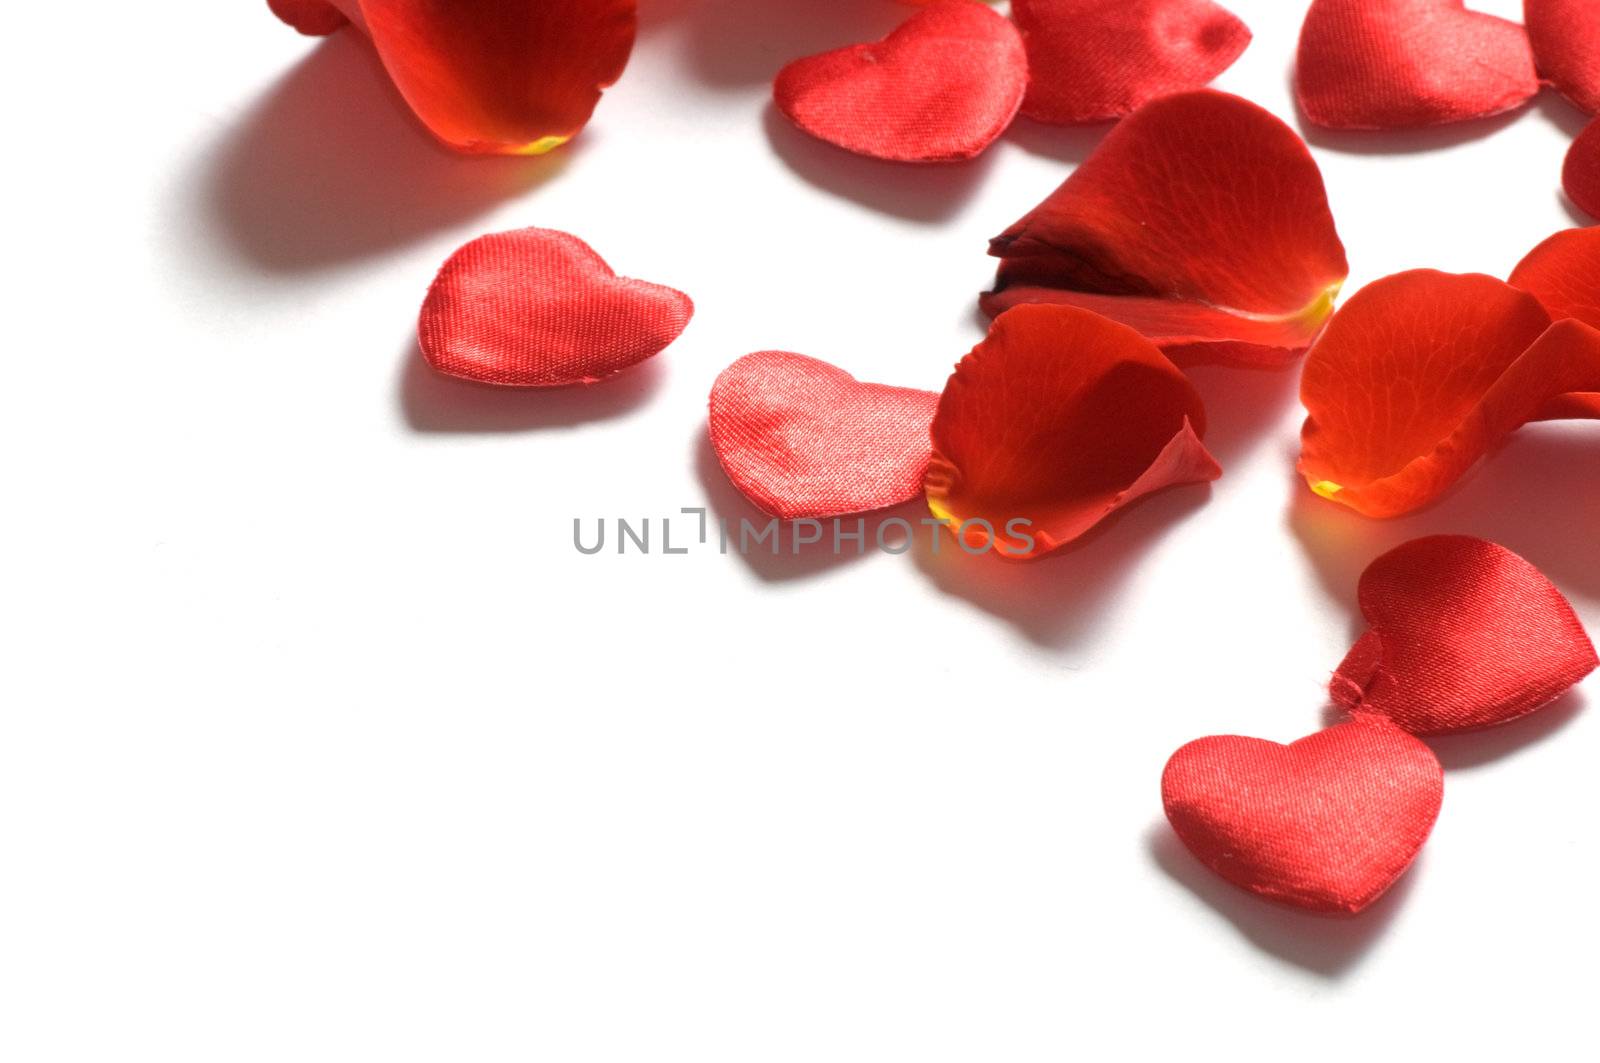 Rose petals and hearts on white background by photocreo